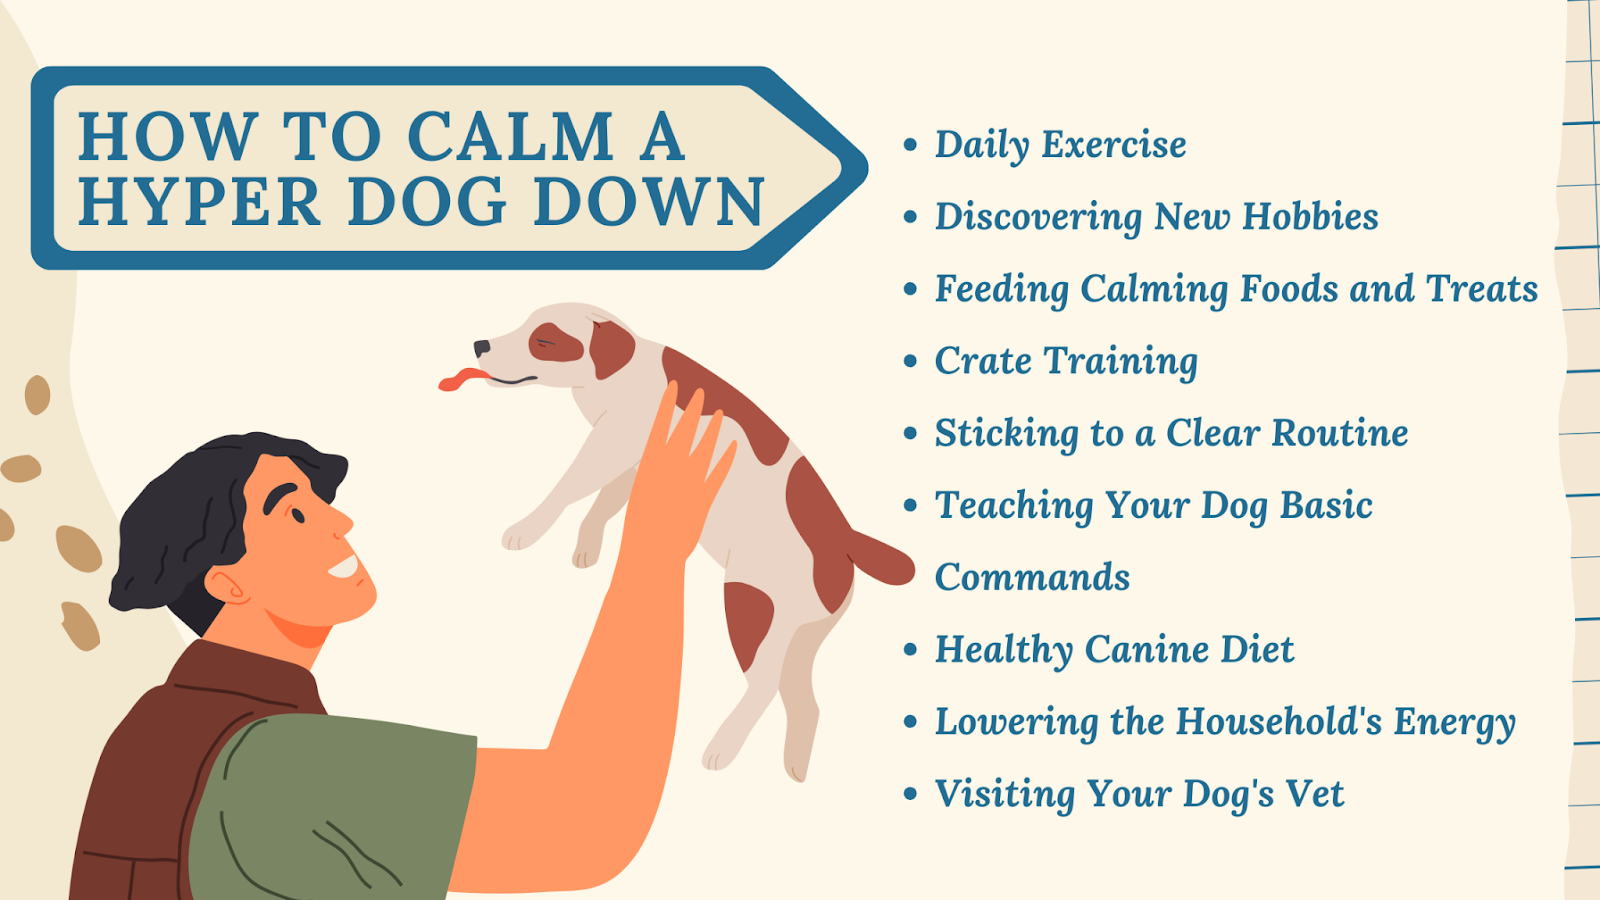 How to calm down a hyper dog